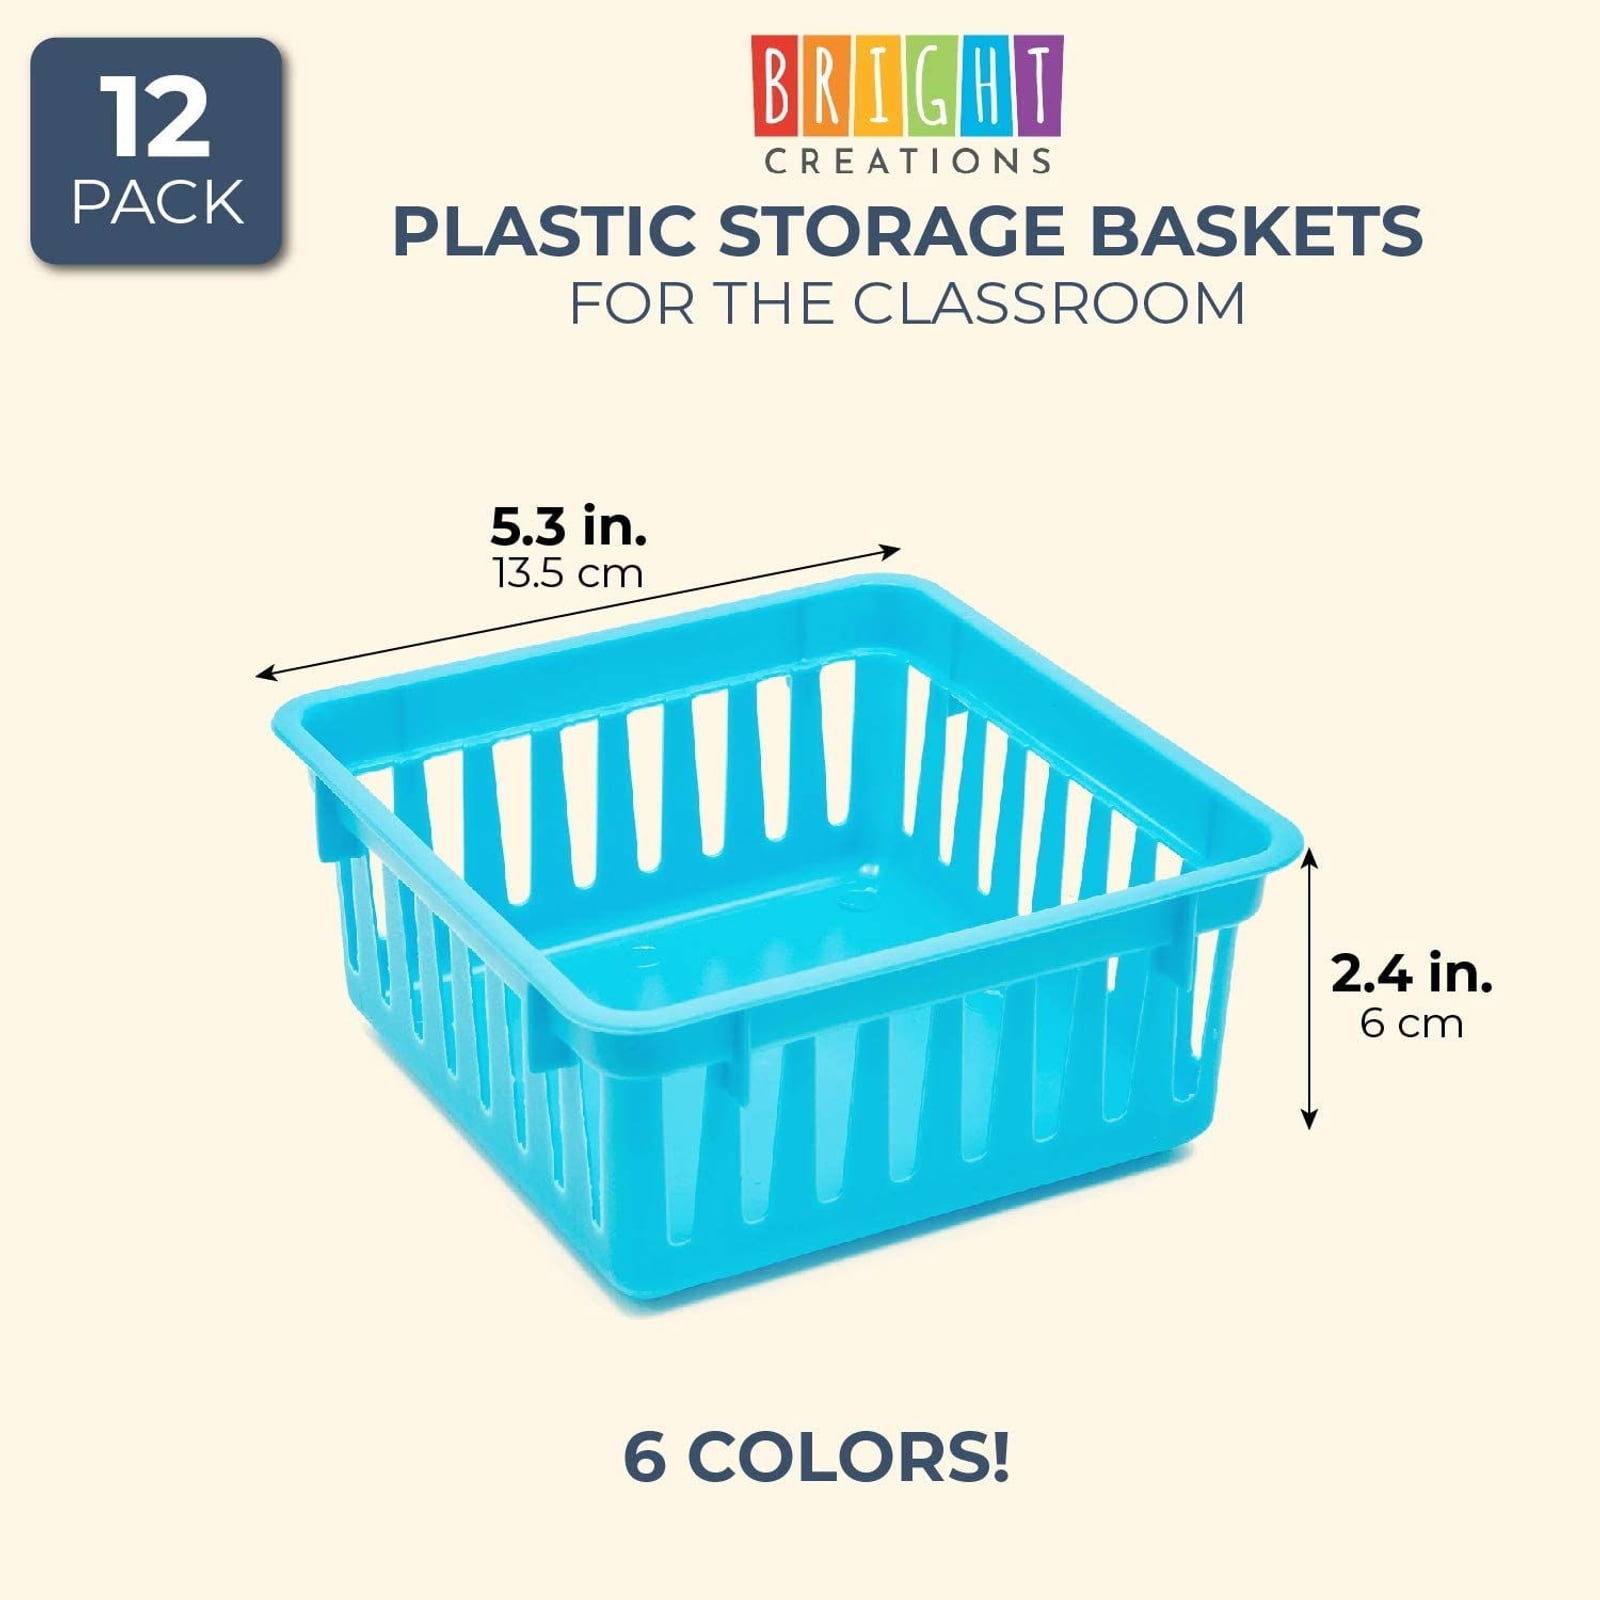 8 Pack Colorful Storage Bins for Classroom - Small Plastic Baskets for  Organizing Shelves, Arts, Crafts, Desks, Toys (4 Colors, 10.3x6.5x2.3 in)